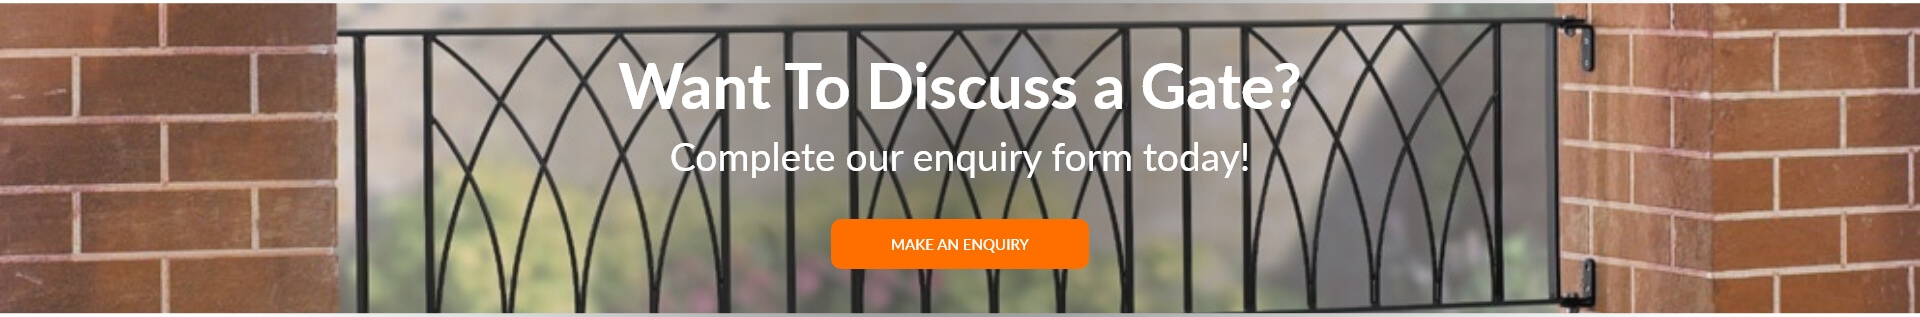 Want to discuss a gate? Fill in our enquiry form today!